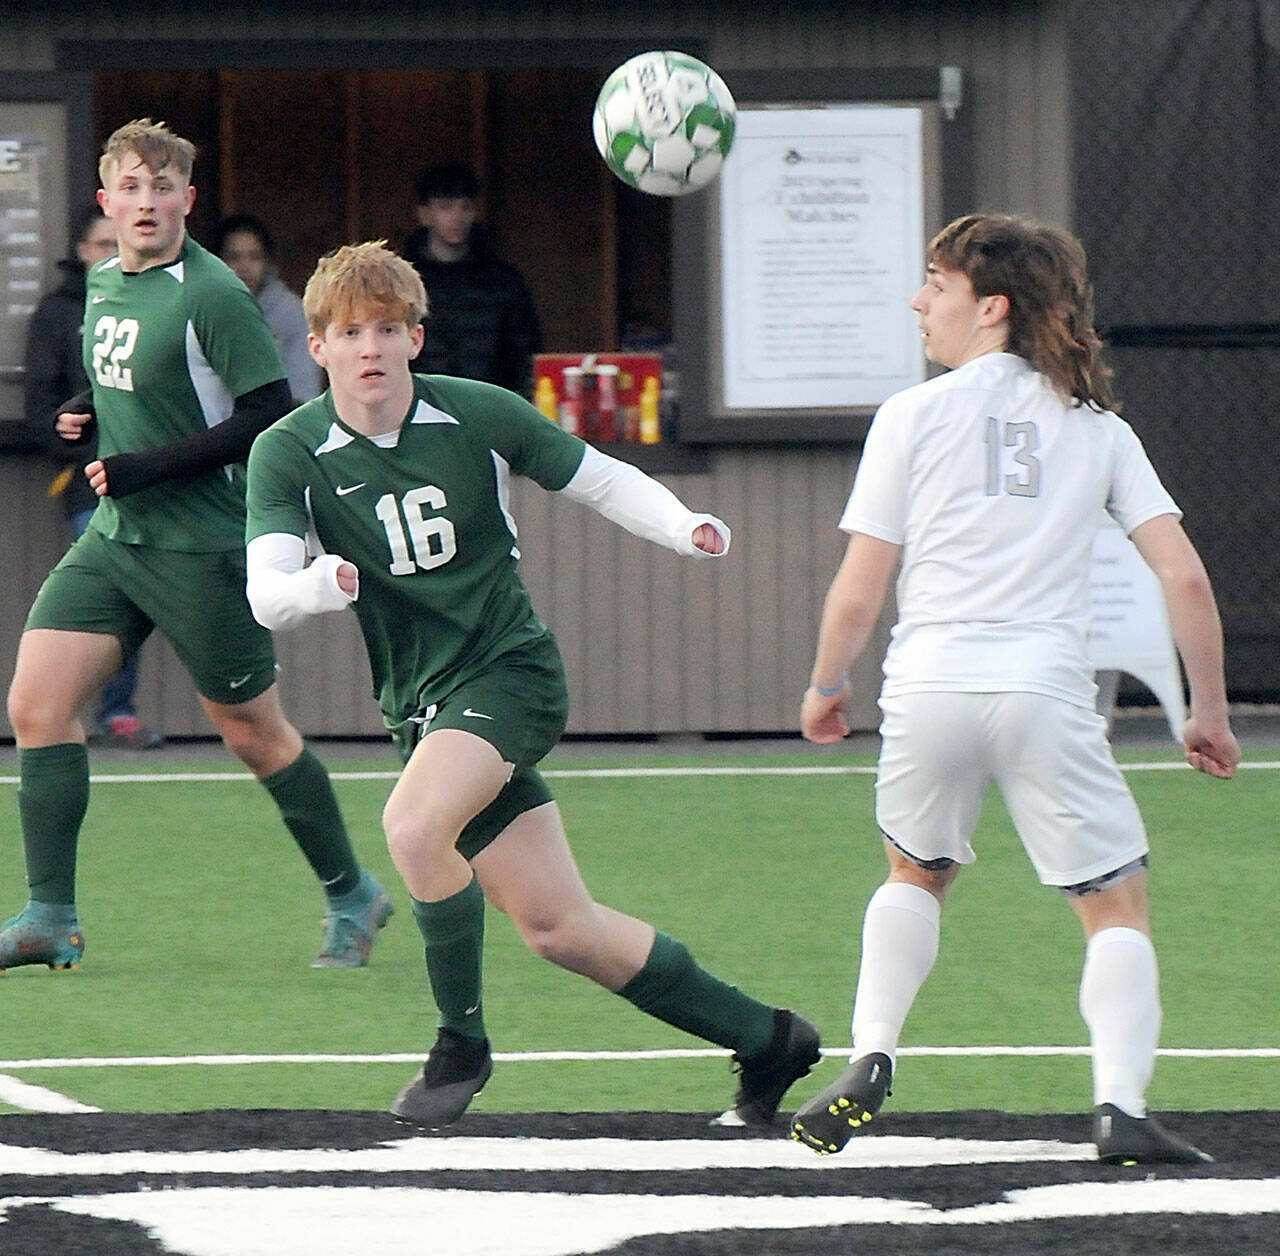 KEITH THORPE/PENINSULA DAILY NEWS Port Angeles’ Zak Alton, center, keeps track of the ball as teammate Eli Fischer, left, and Olympic’s Justin Thorsen look on during Thursday’s match at Peninsula College in Port Angeles.